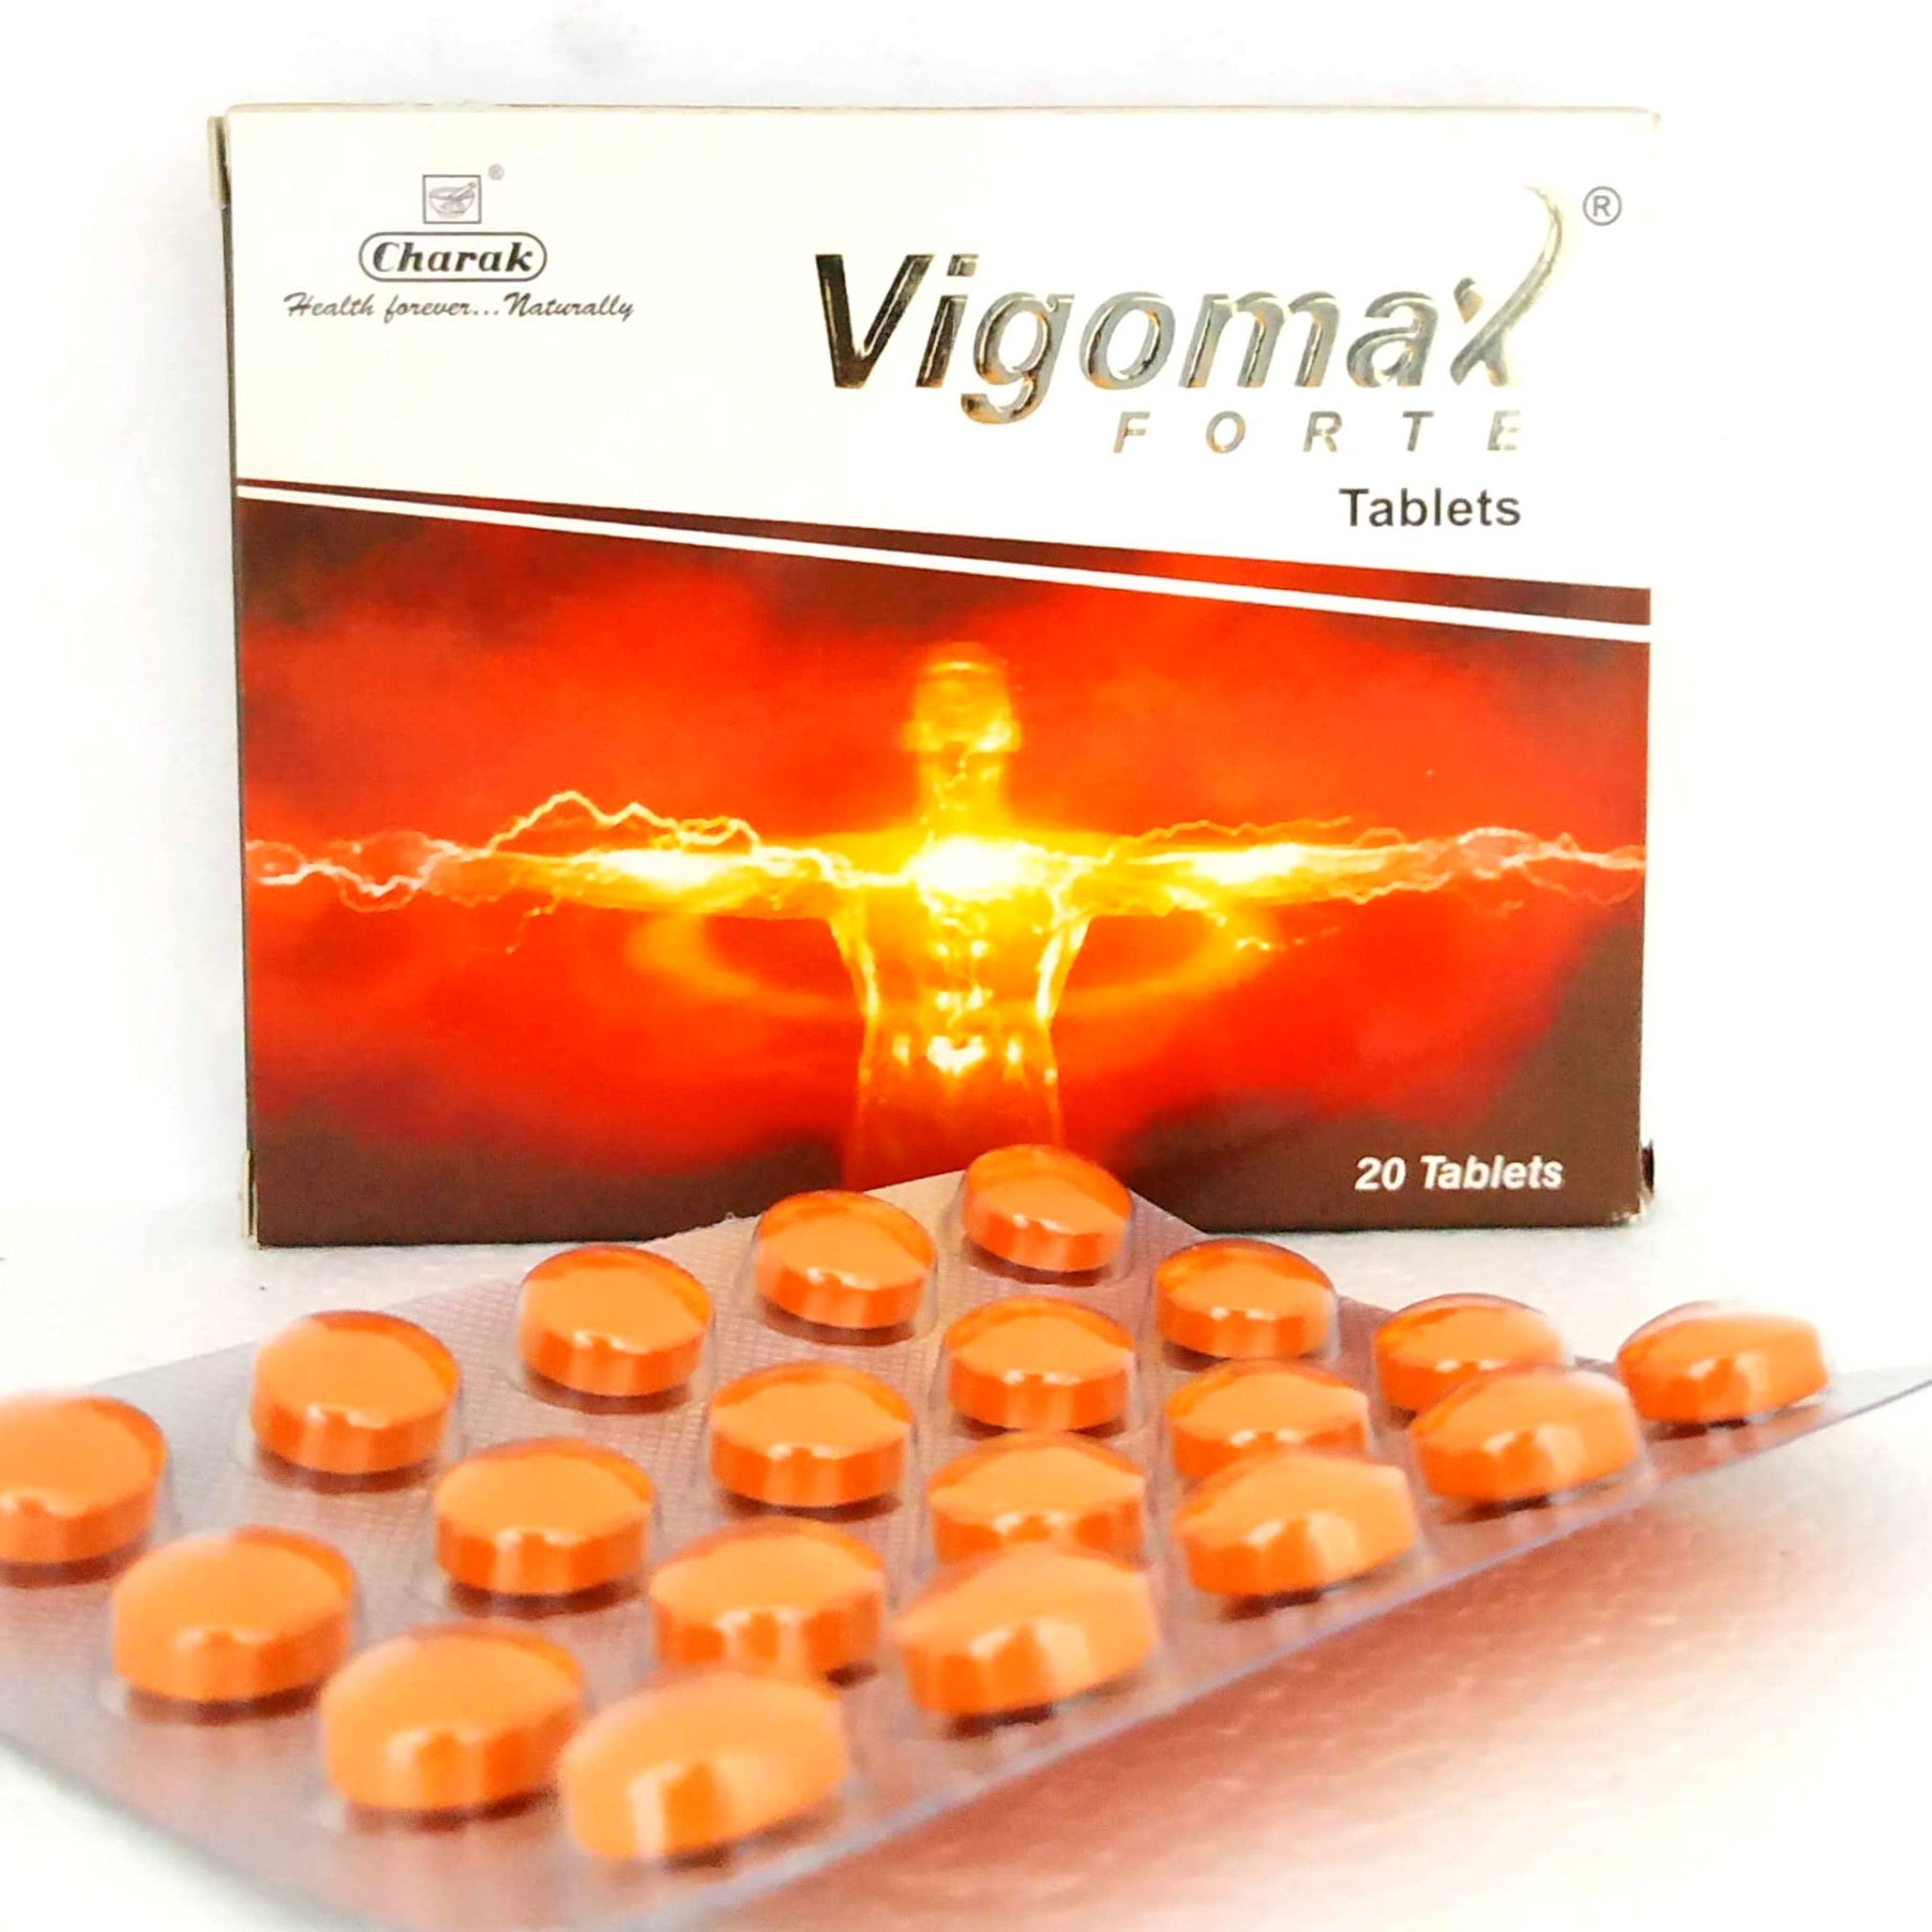 Shop Vigomax Forte - 20Tablets at price 215.00 from Charak Online - Ayush Care